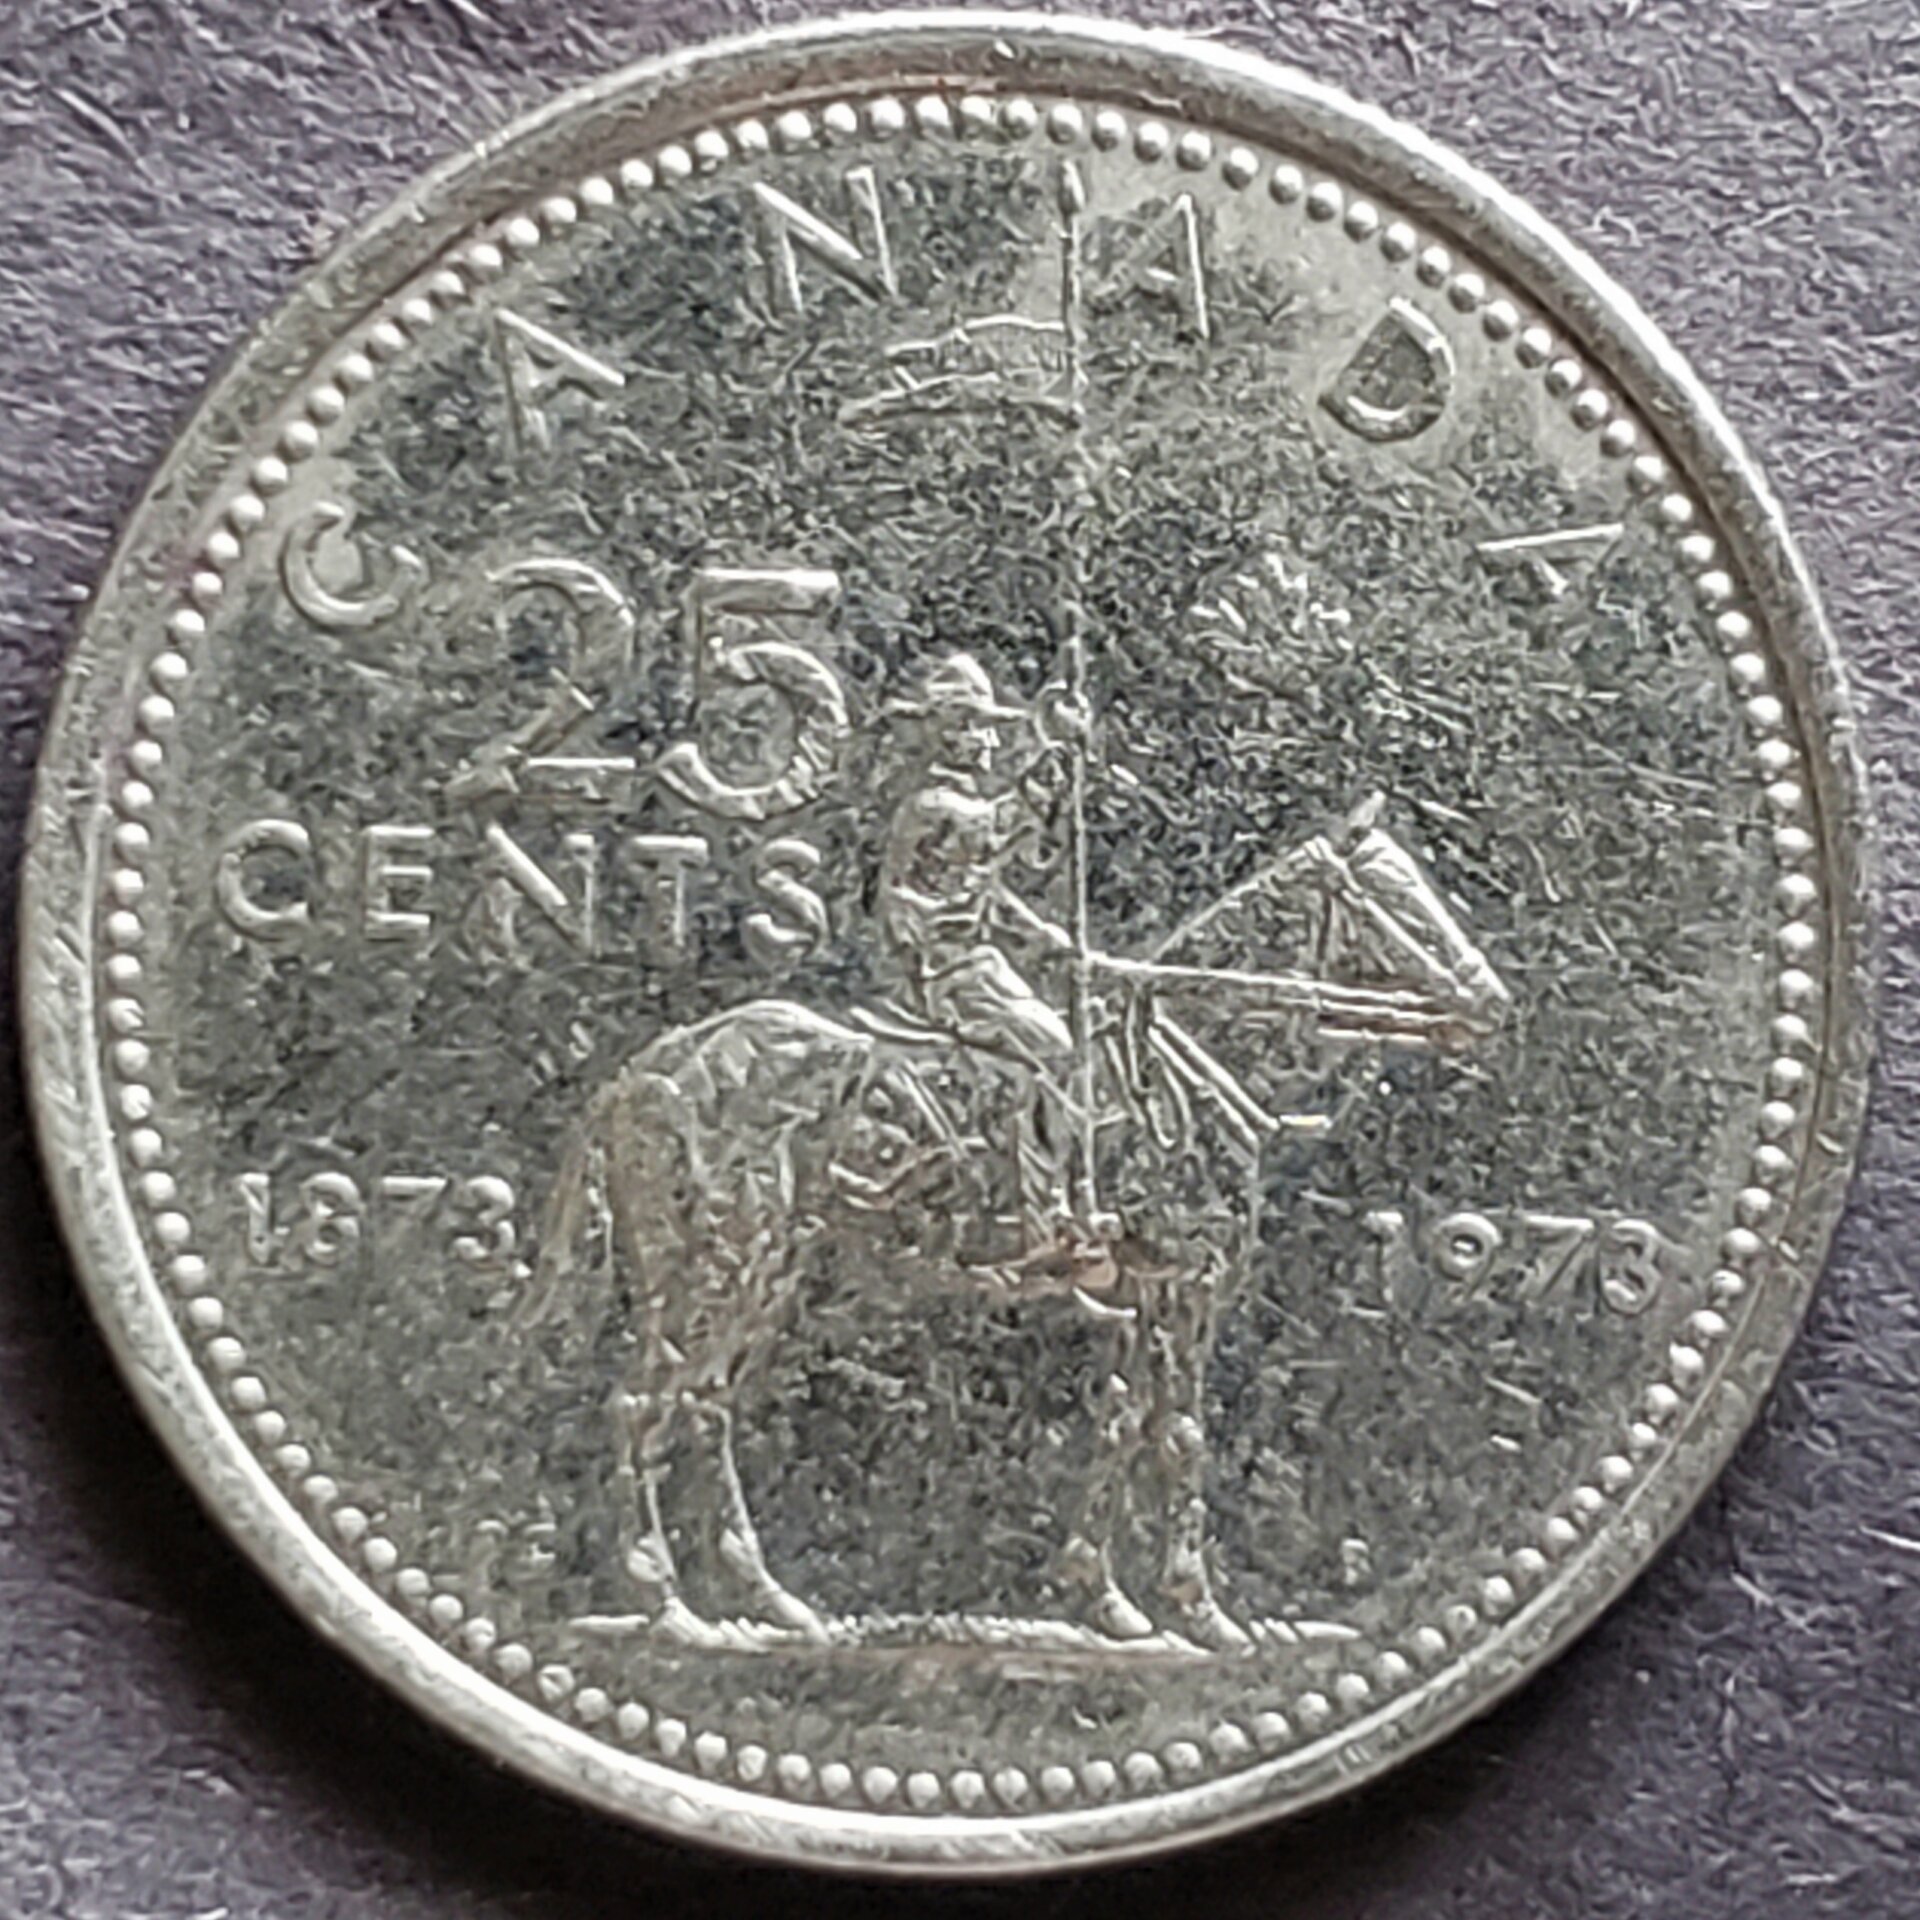 1973 Canadian quarter Large bust or small?